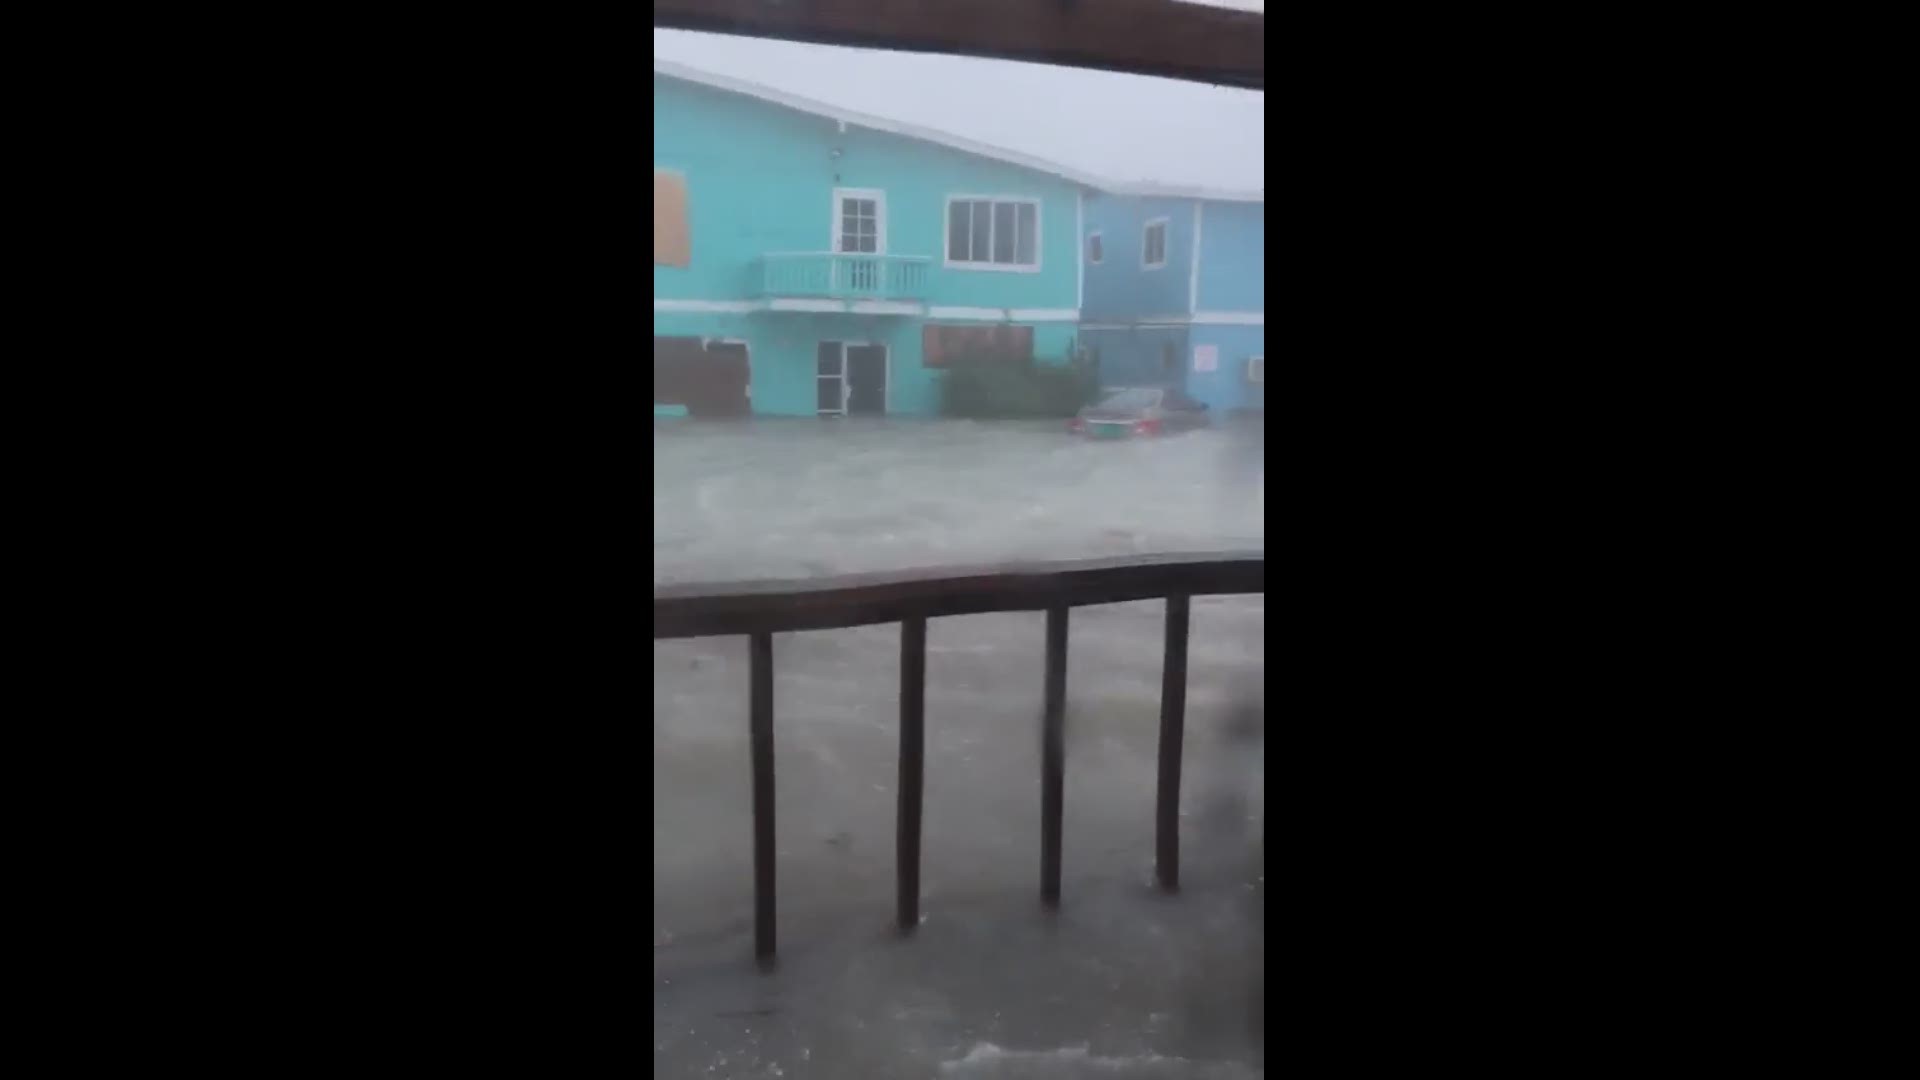 The storm made landfall in Elbow Cay, the Bahamas, around 12:45 p.m. Sunday with maximum sustained winds of 185 mph. (Video courtesy: Renia Rolle)  
LIVE BLOG ➡️ on.wtsp.com/Dorian
RESOURCES ➡️ on.wtsp.com/Tropics
FREE APP ➡️ on.wtsp.com/app